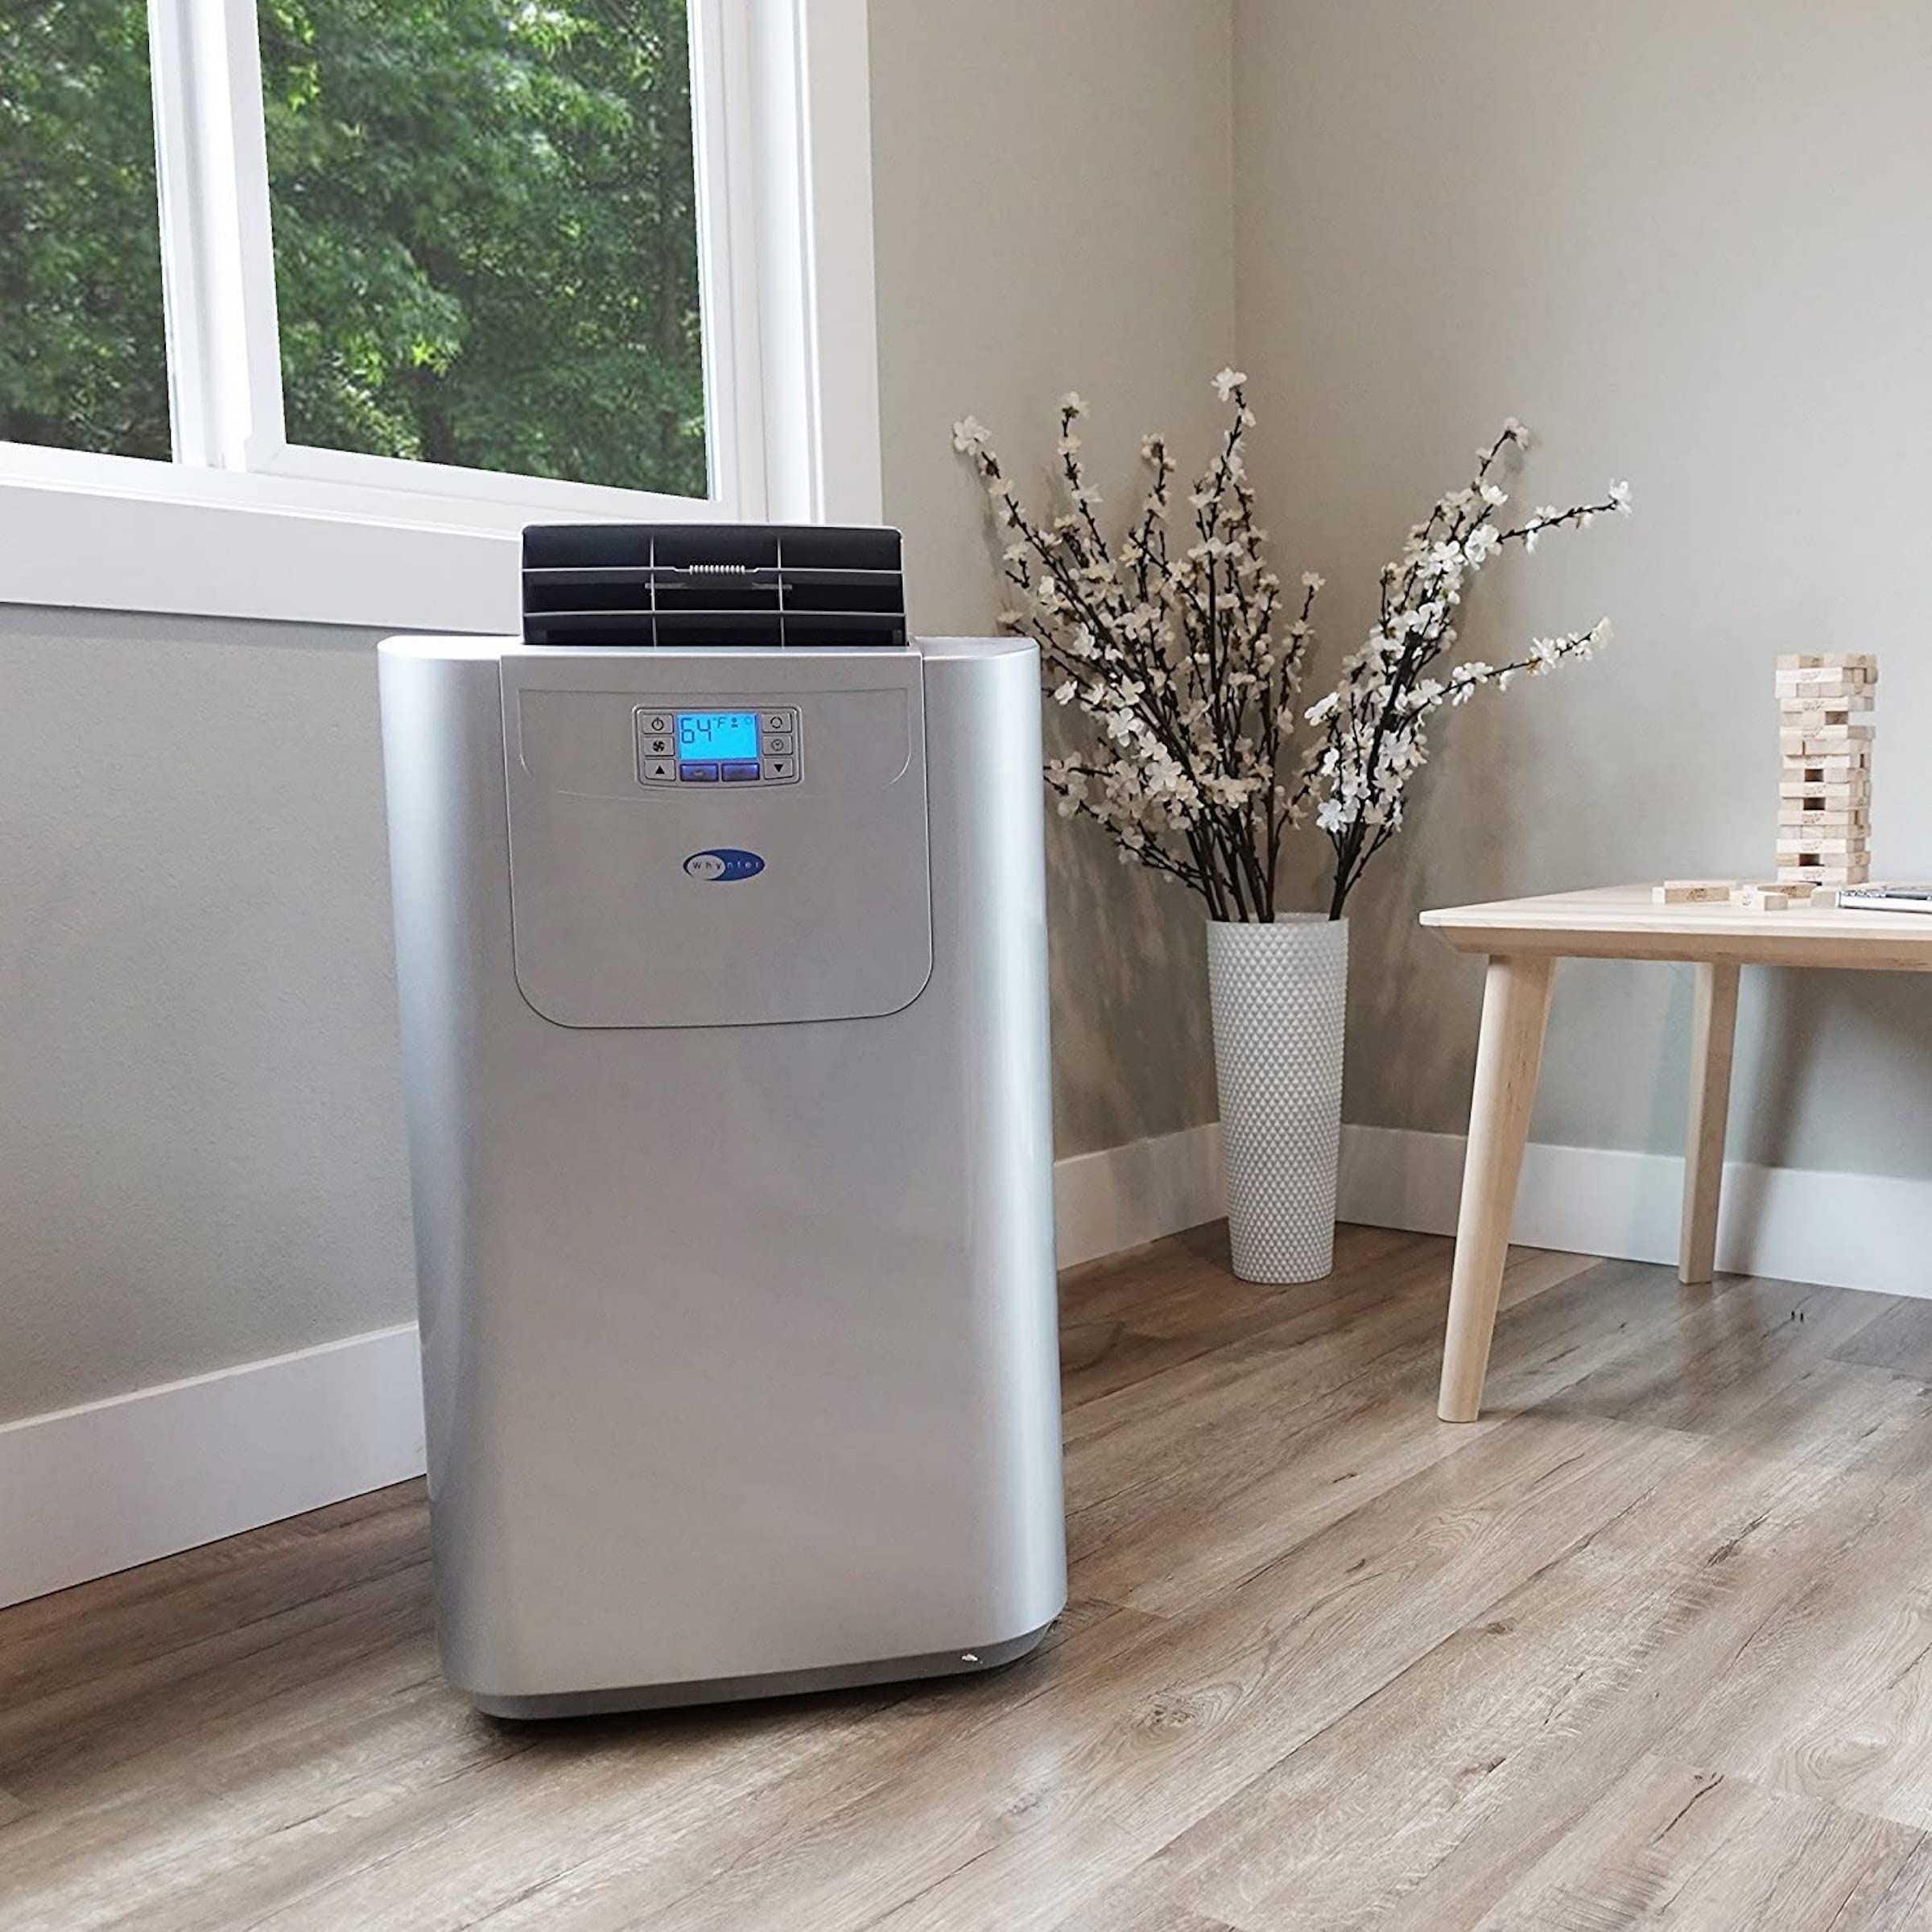 Featured image for This Old House's best portable air conditioner guide, one of the best portable air conditioners in silver, located inside a home.